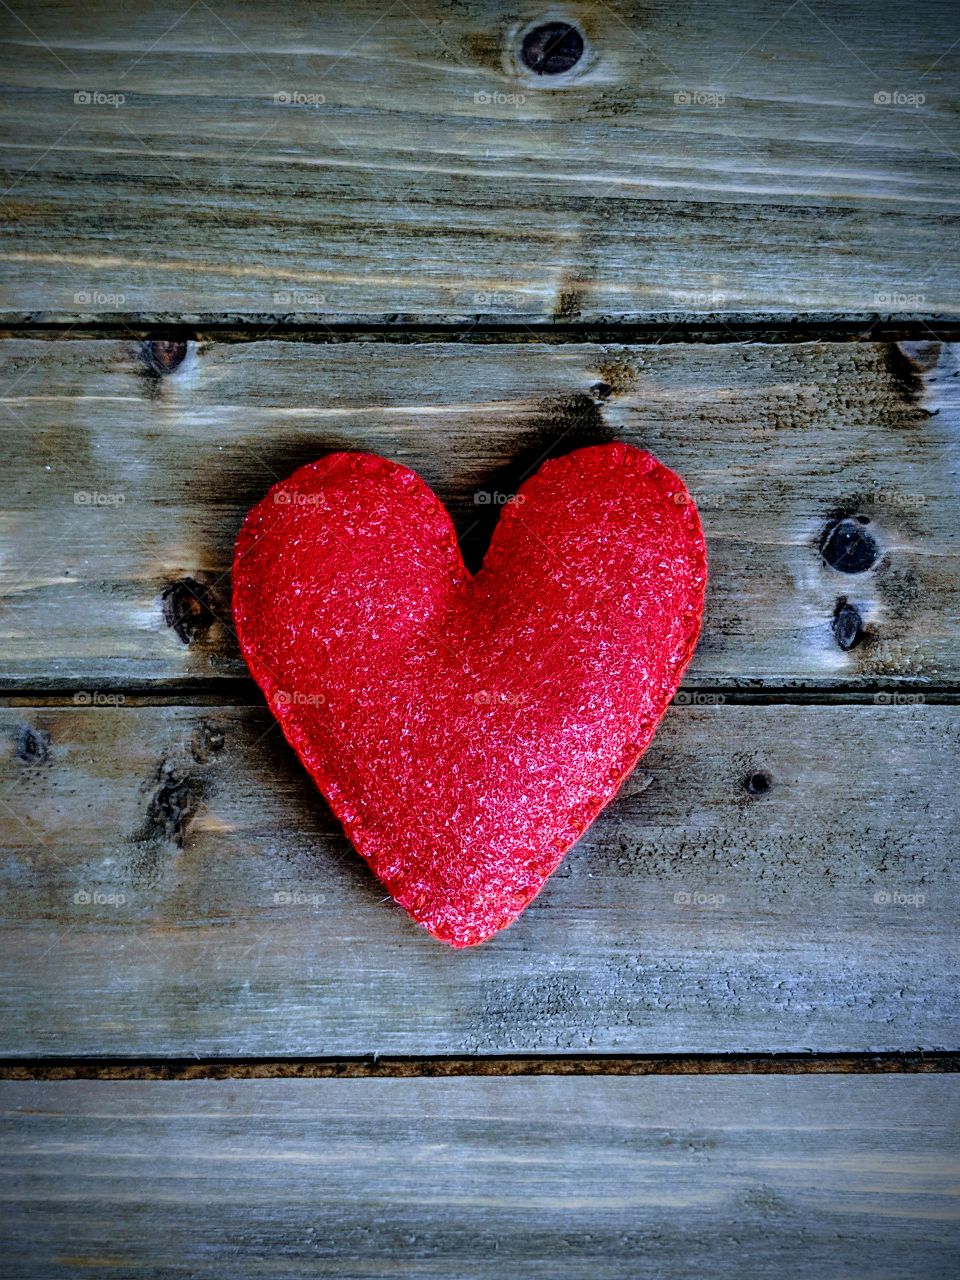 A red heart on a wooden background